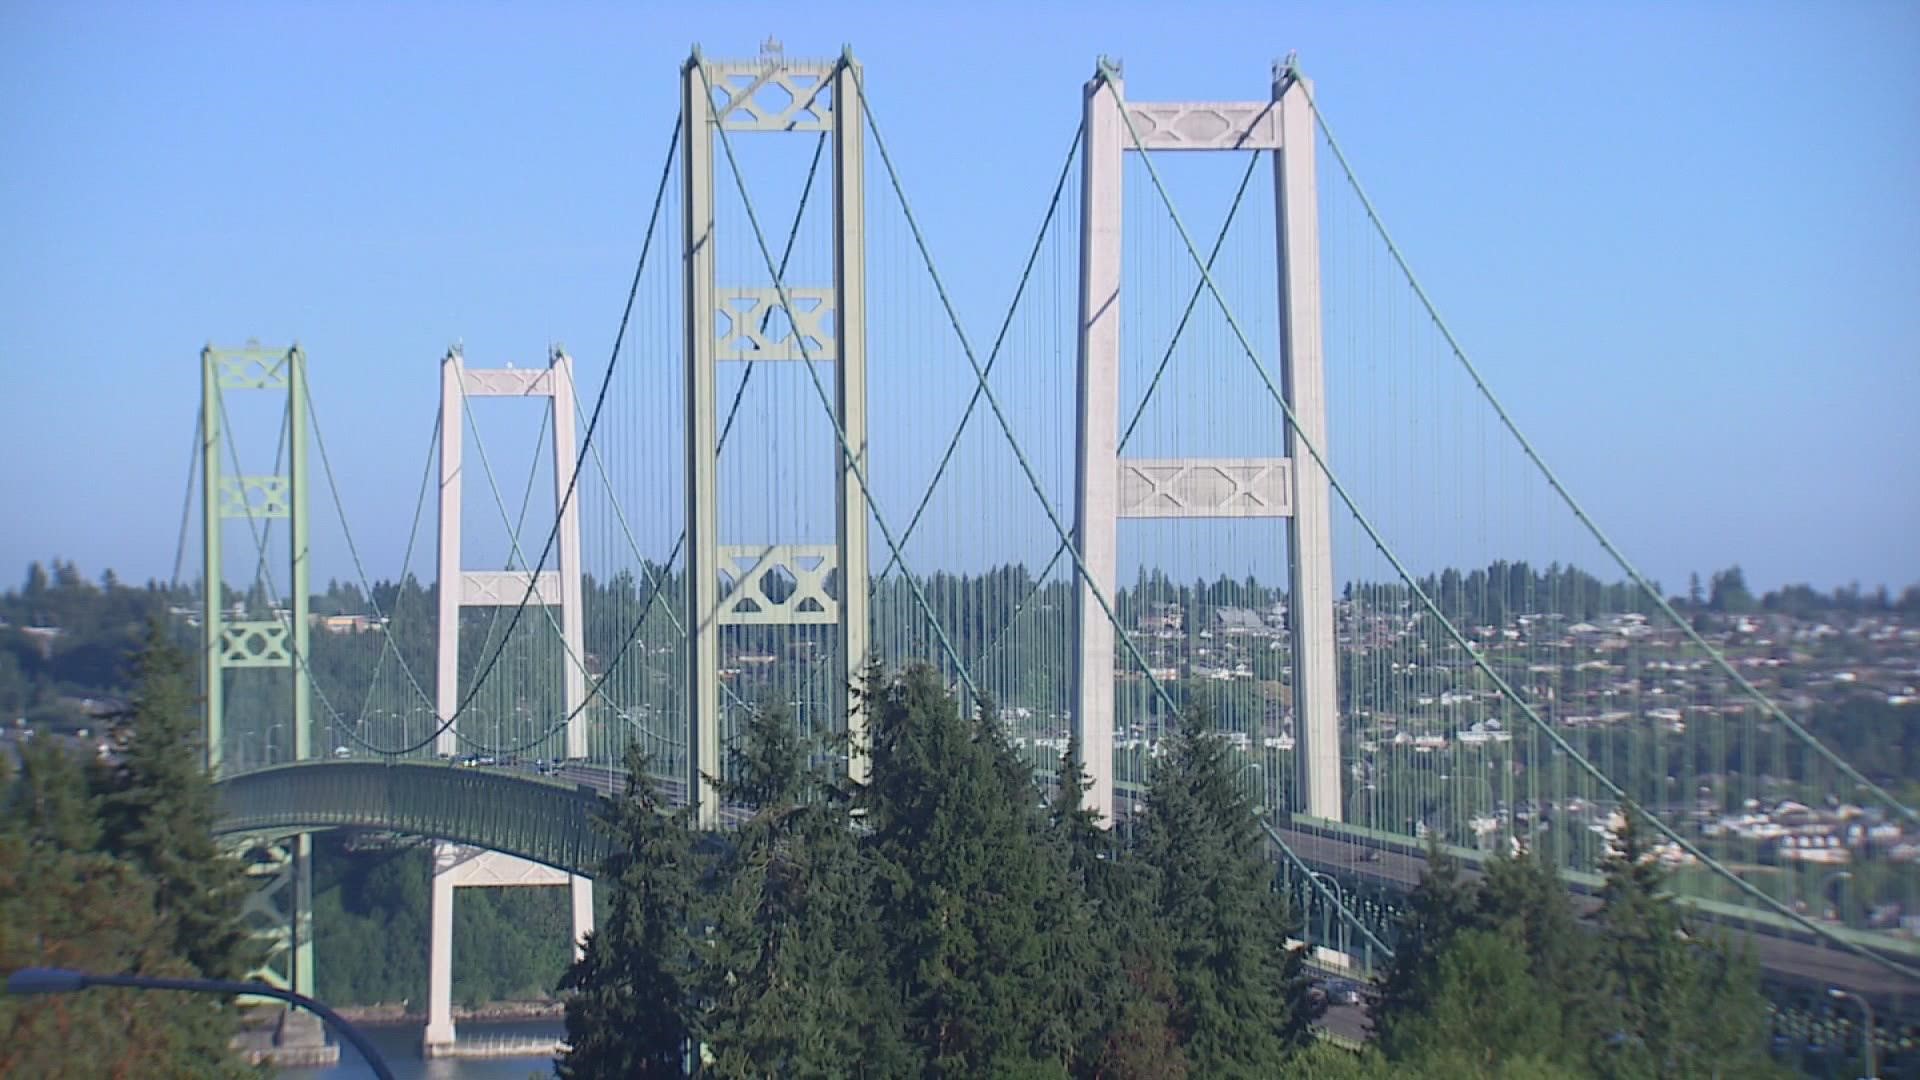 Officials plan on lowering the toll to cross the Tacoma Narrows Bridge in October